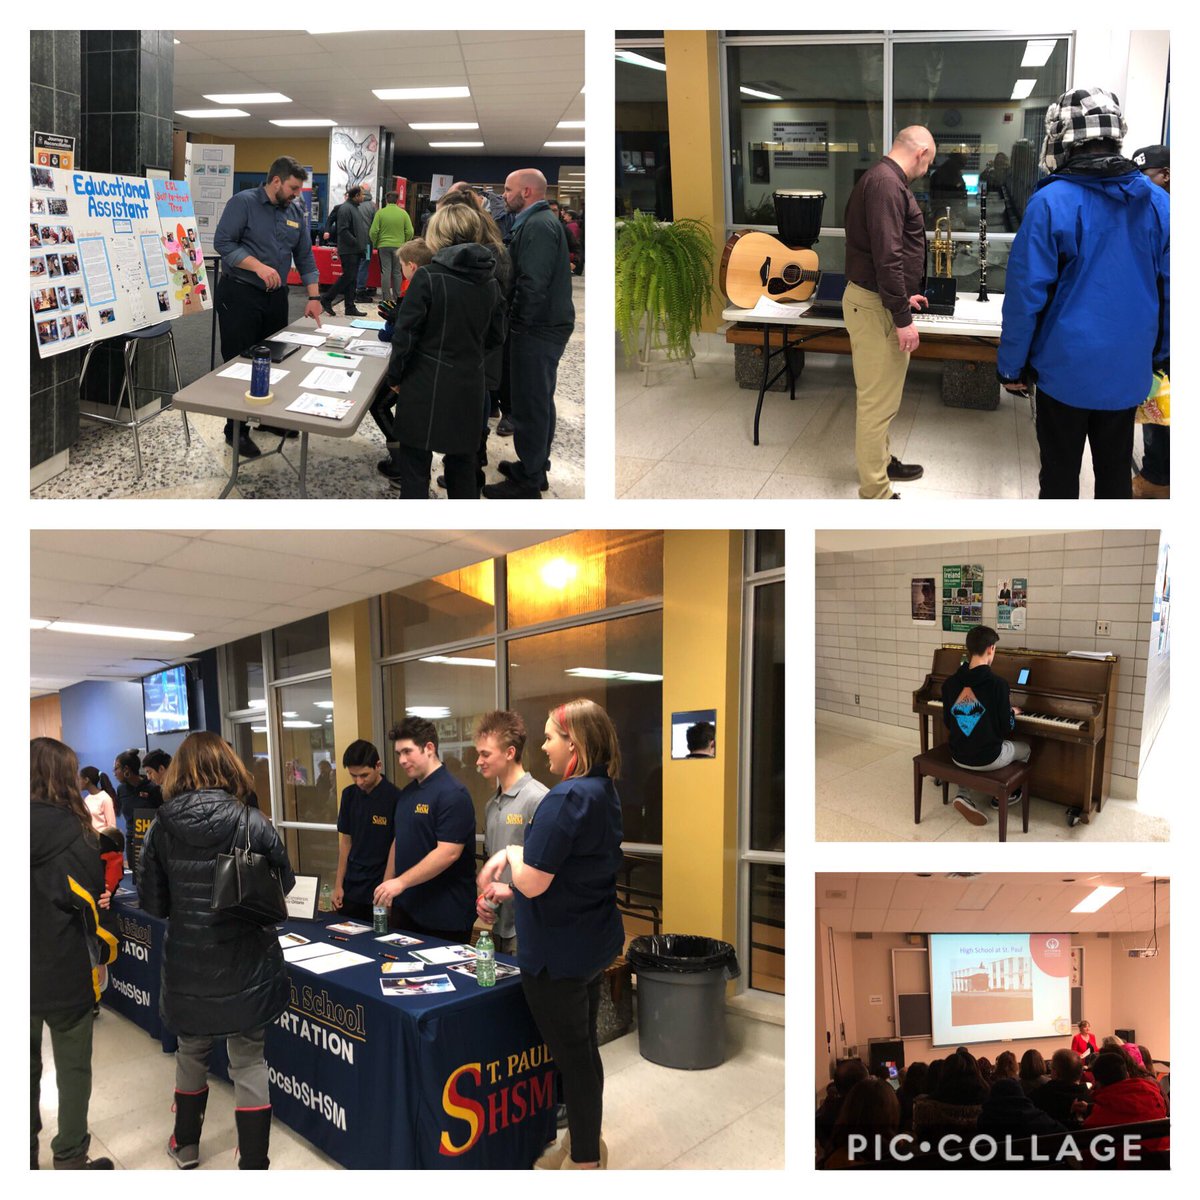 Great turnout @StPaulOCSB for high school program night. Lots of new insight into options for our future grade 9s. #BeStPaul #ocsbSHSM